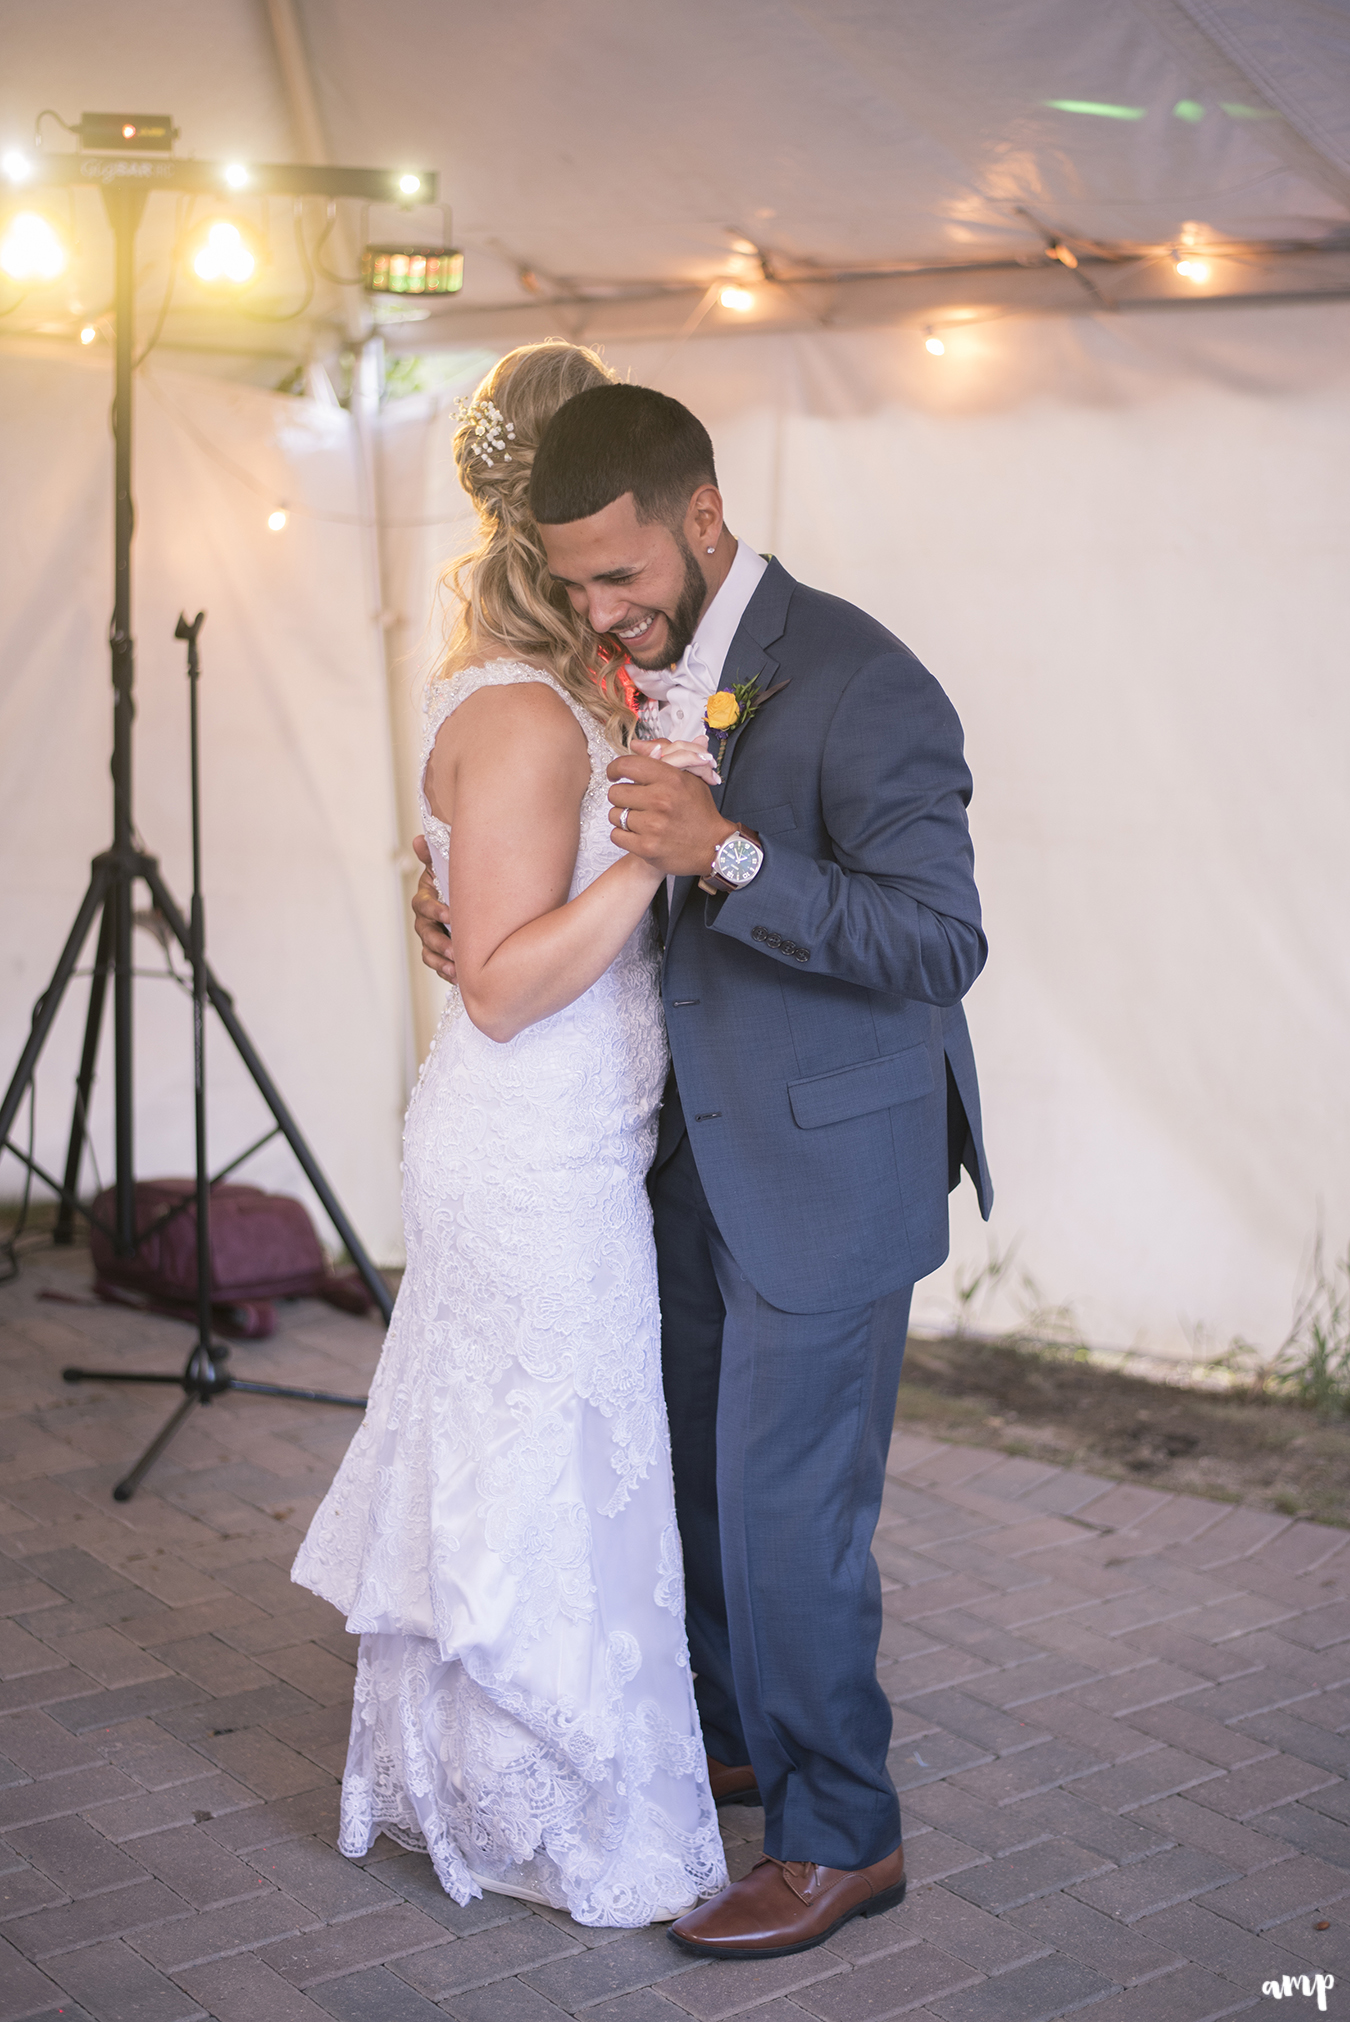 Bride & Groom's first dance at the Crested Butte Mountain Wedding Garden